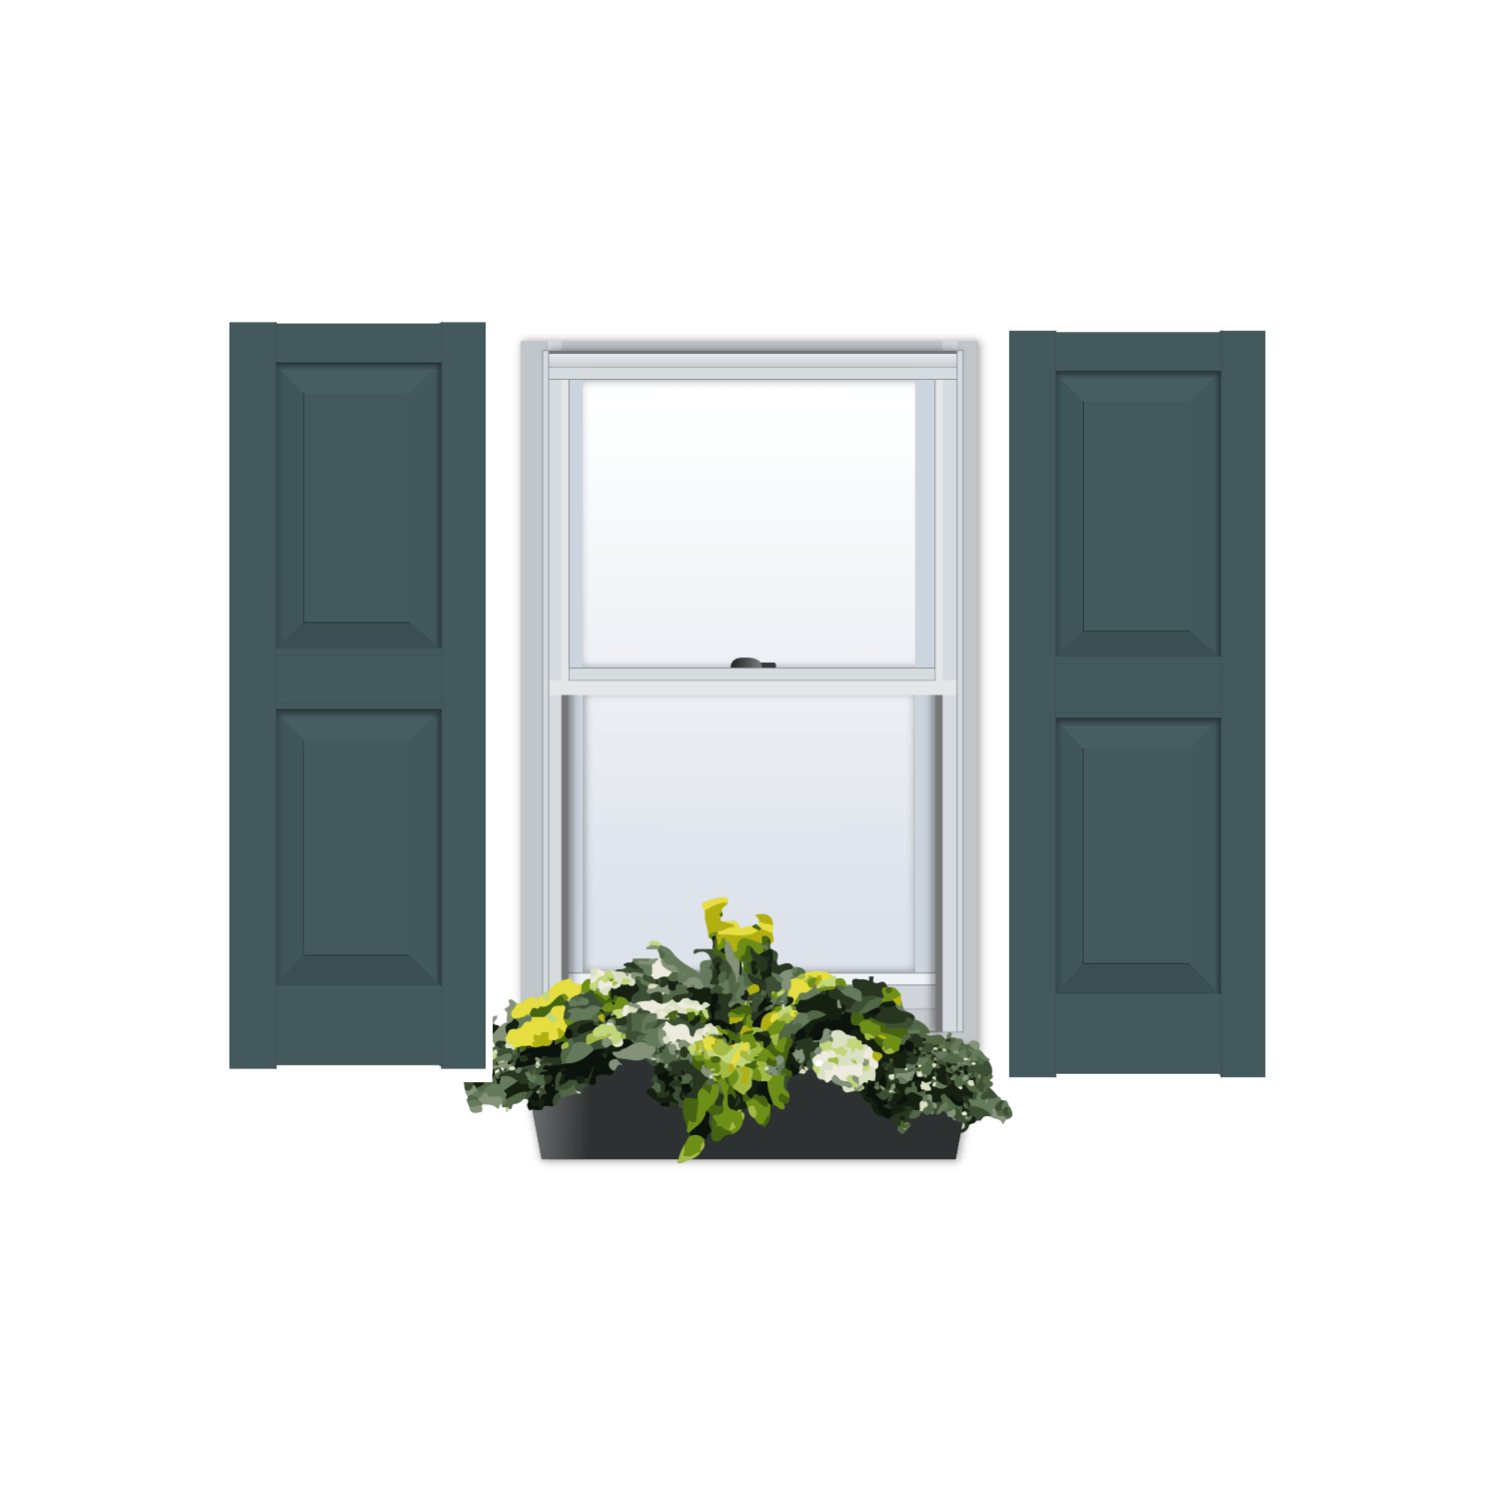 Vinyl | Raised Panel Exterior Shutters | Two Equal Sections | 1 Pair